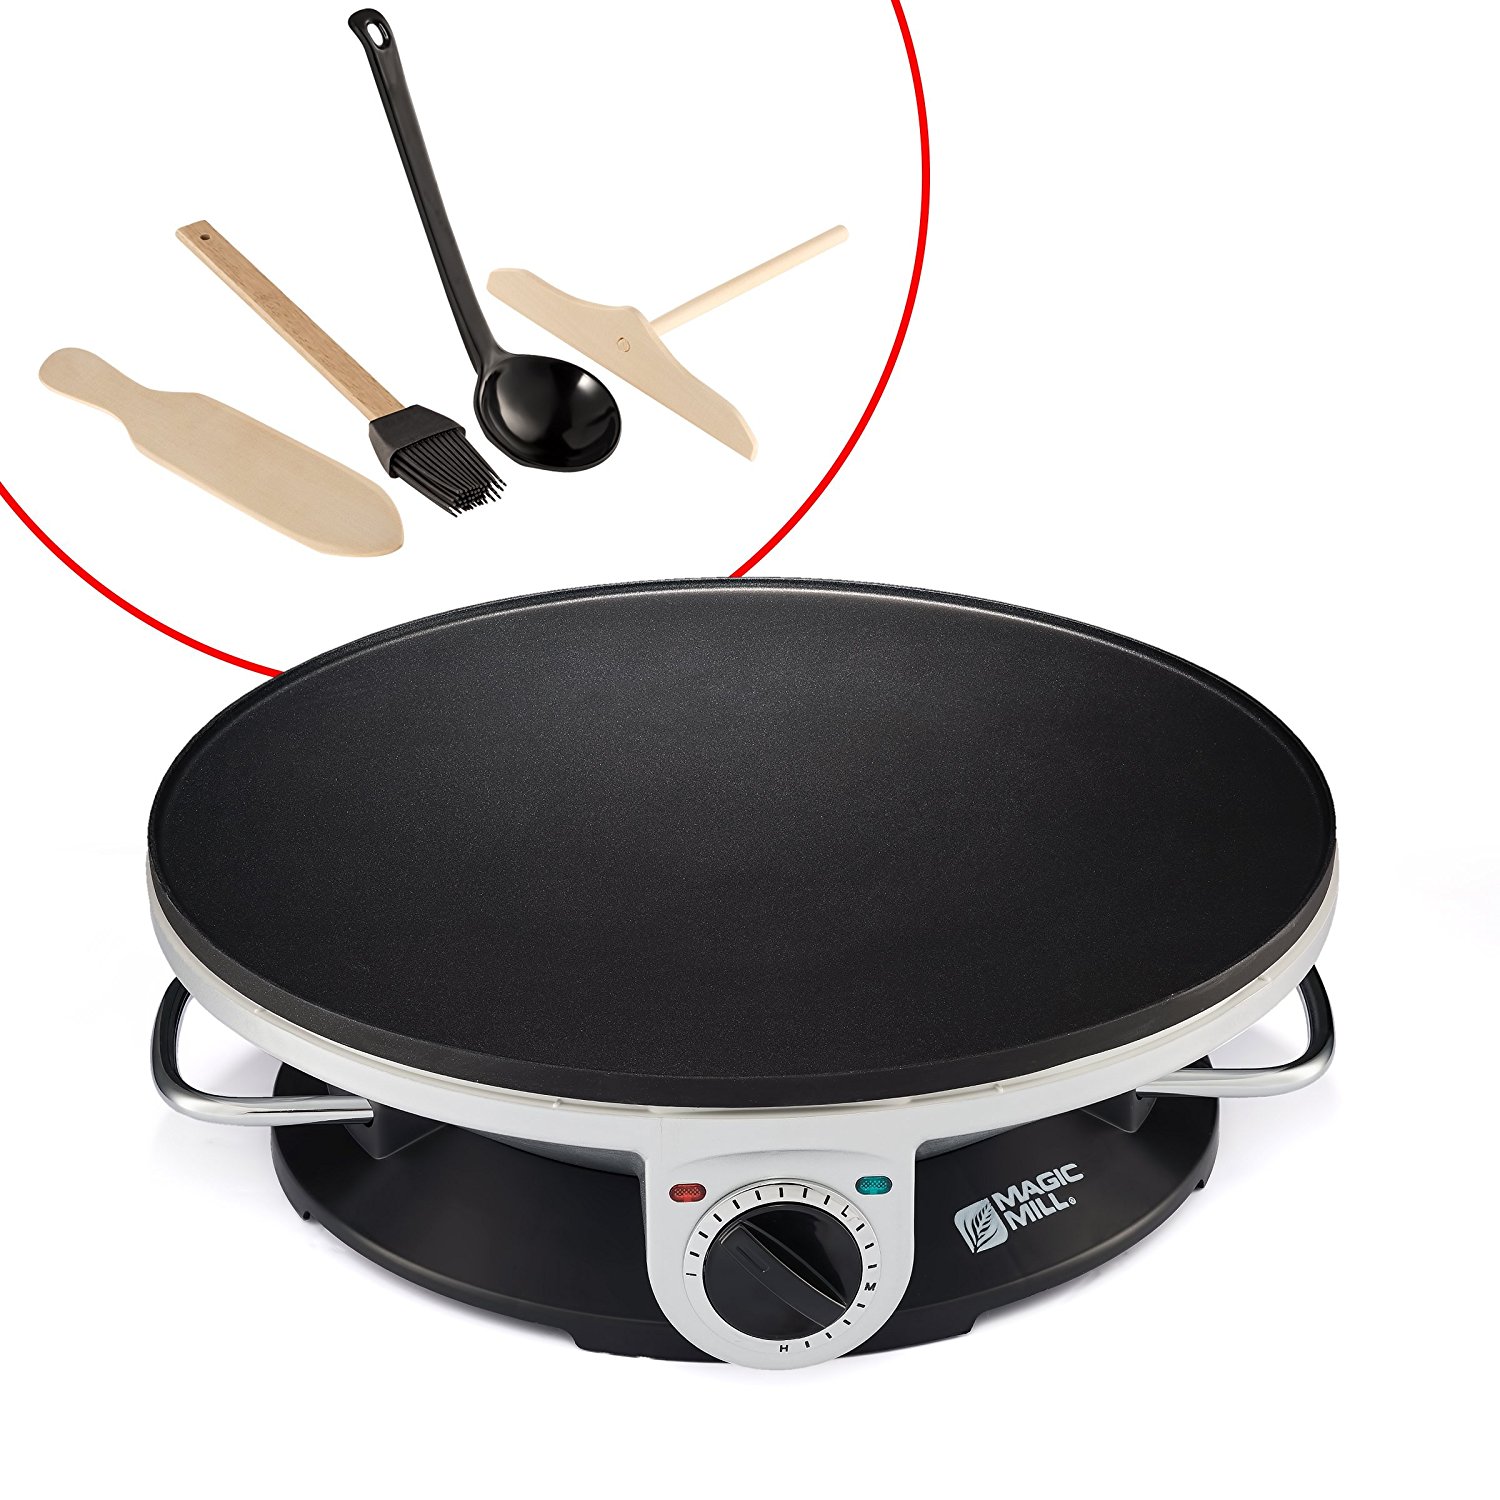 Magic Mill 13" Professional Electric Crepe Maker & Griddle, Non-stick Cooking Plate, Variable Temperature Control, Includes: Batter Spreader, Wooden Spatula, Oil Brush and ladle, 1000 W